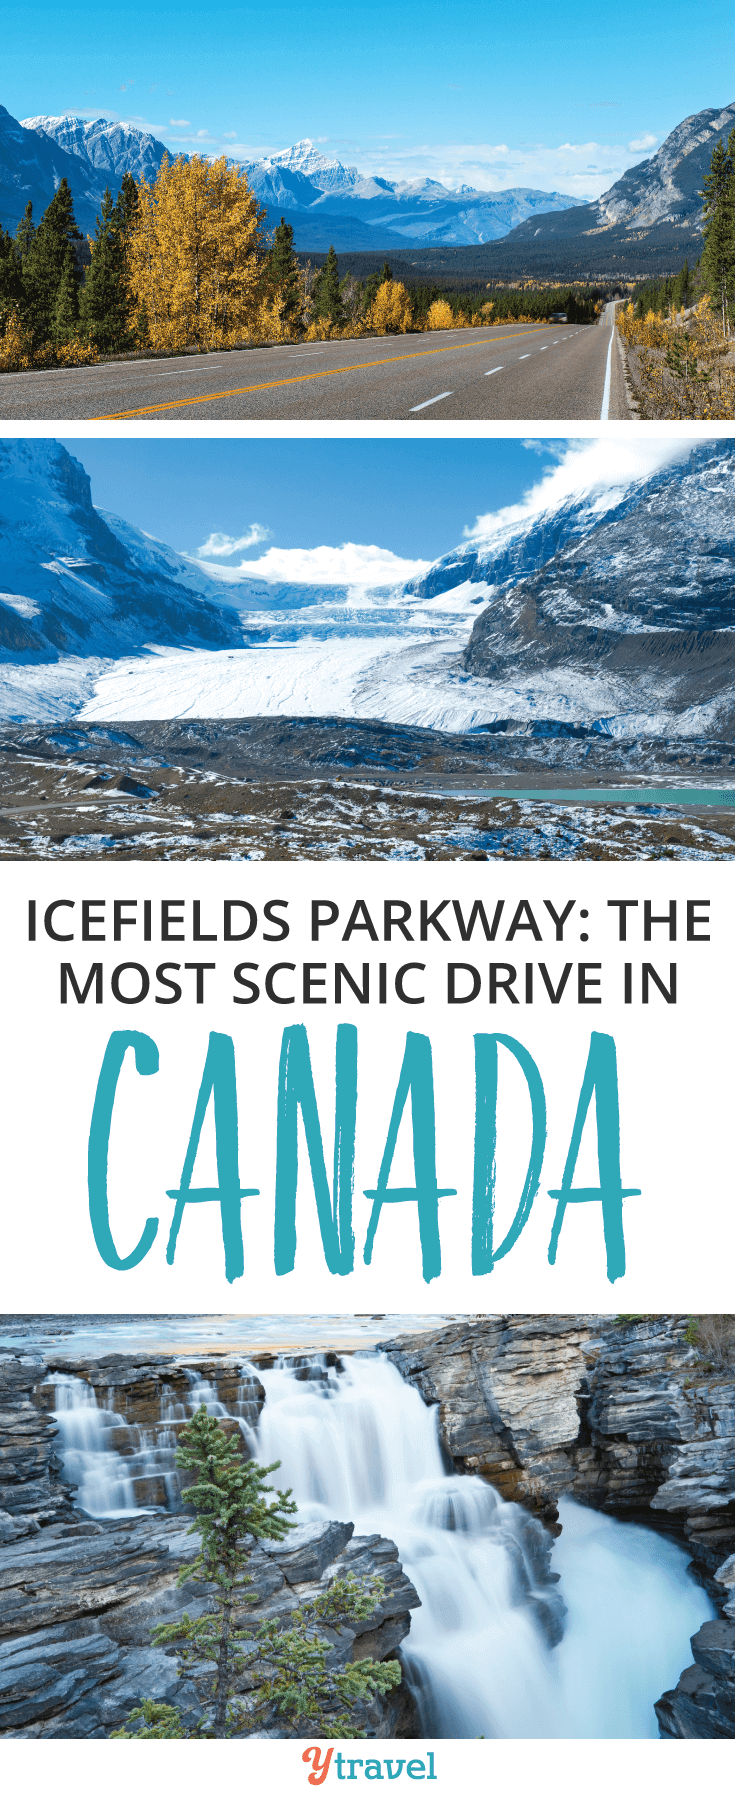 Icefields Parkway is the most scenic drive in Canada! Check out these beautiful lakes, waterfalls and jaw dropping mountains.